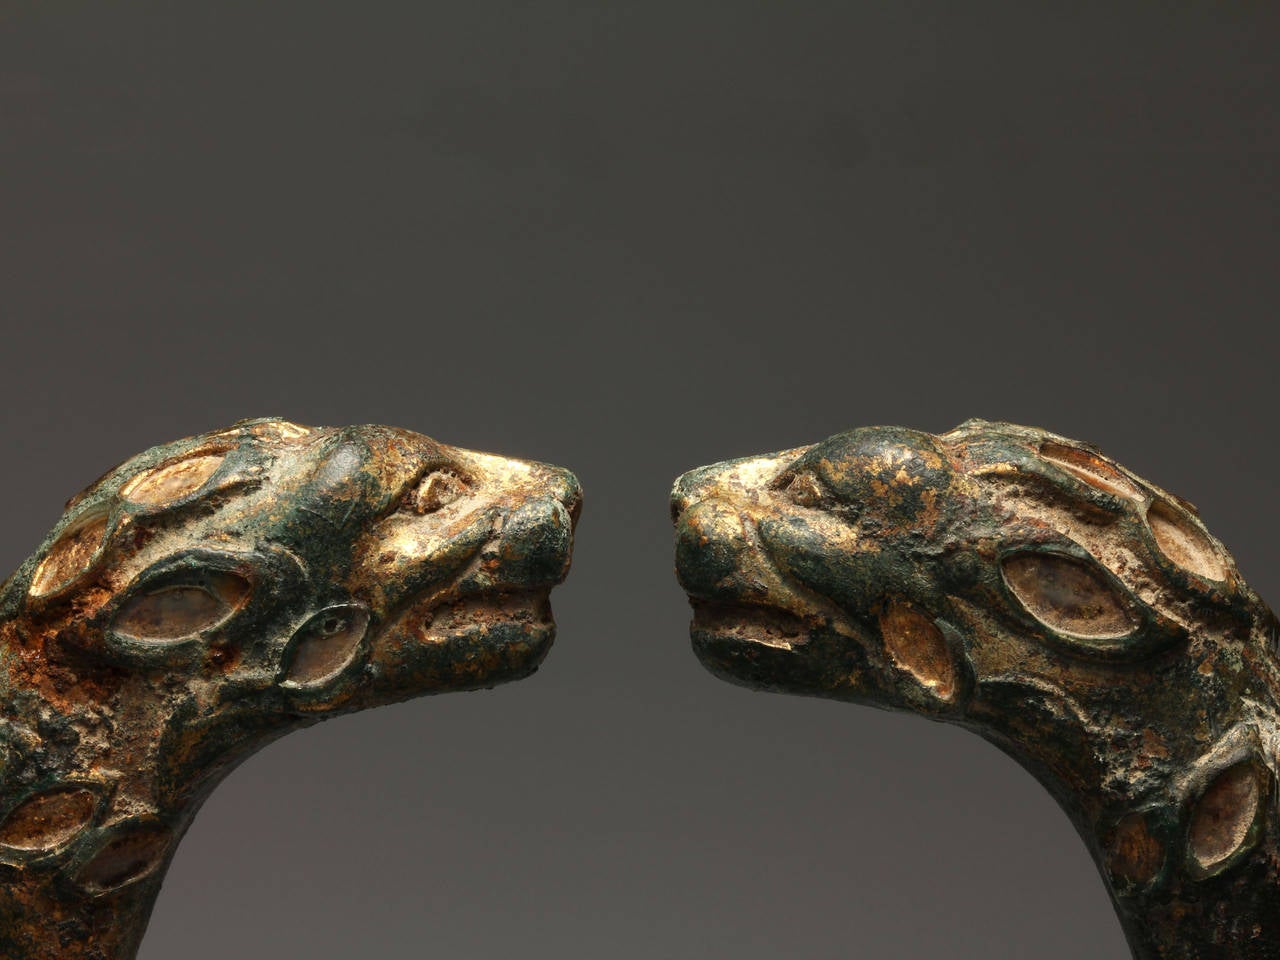 The solid penannular hoop terminating in two confronting lion heads, with snarling open mouths, decorated with incised petal-shaped markings filled in niello-like inlays, some of which are preserved. Weight: 377g. Mounted

Near identical bracelets